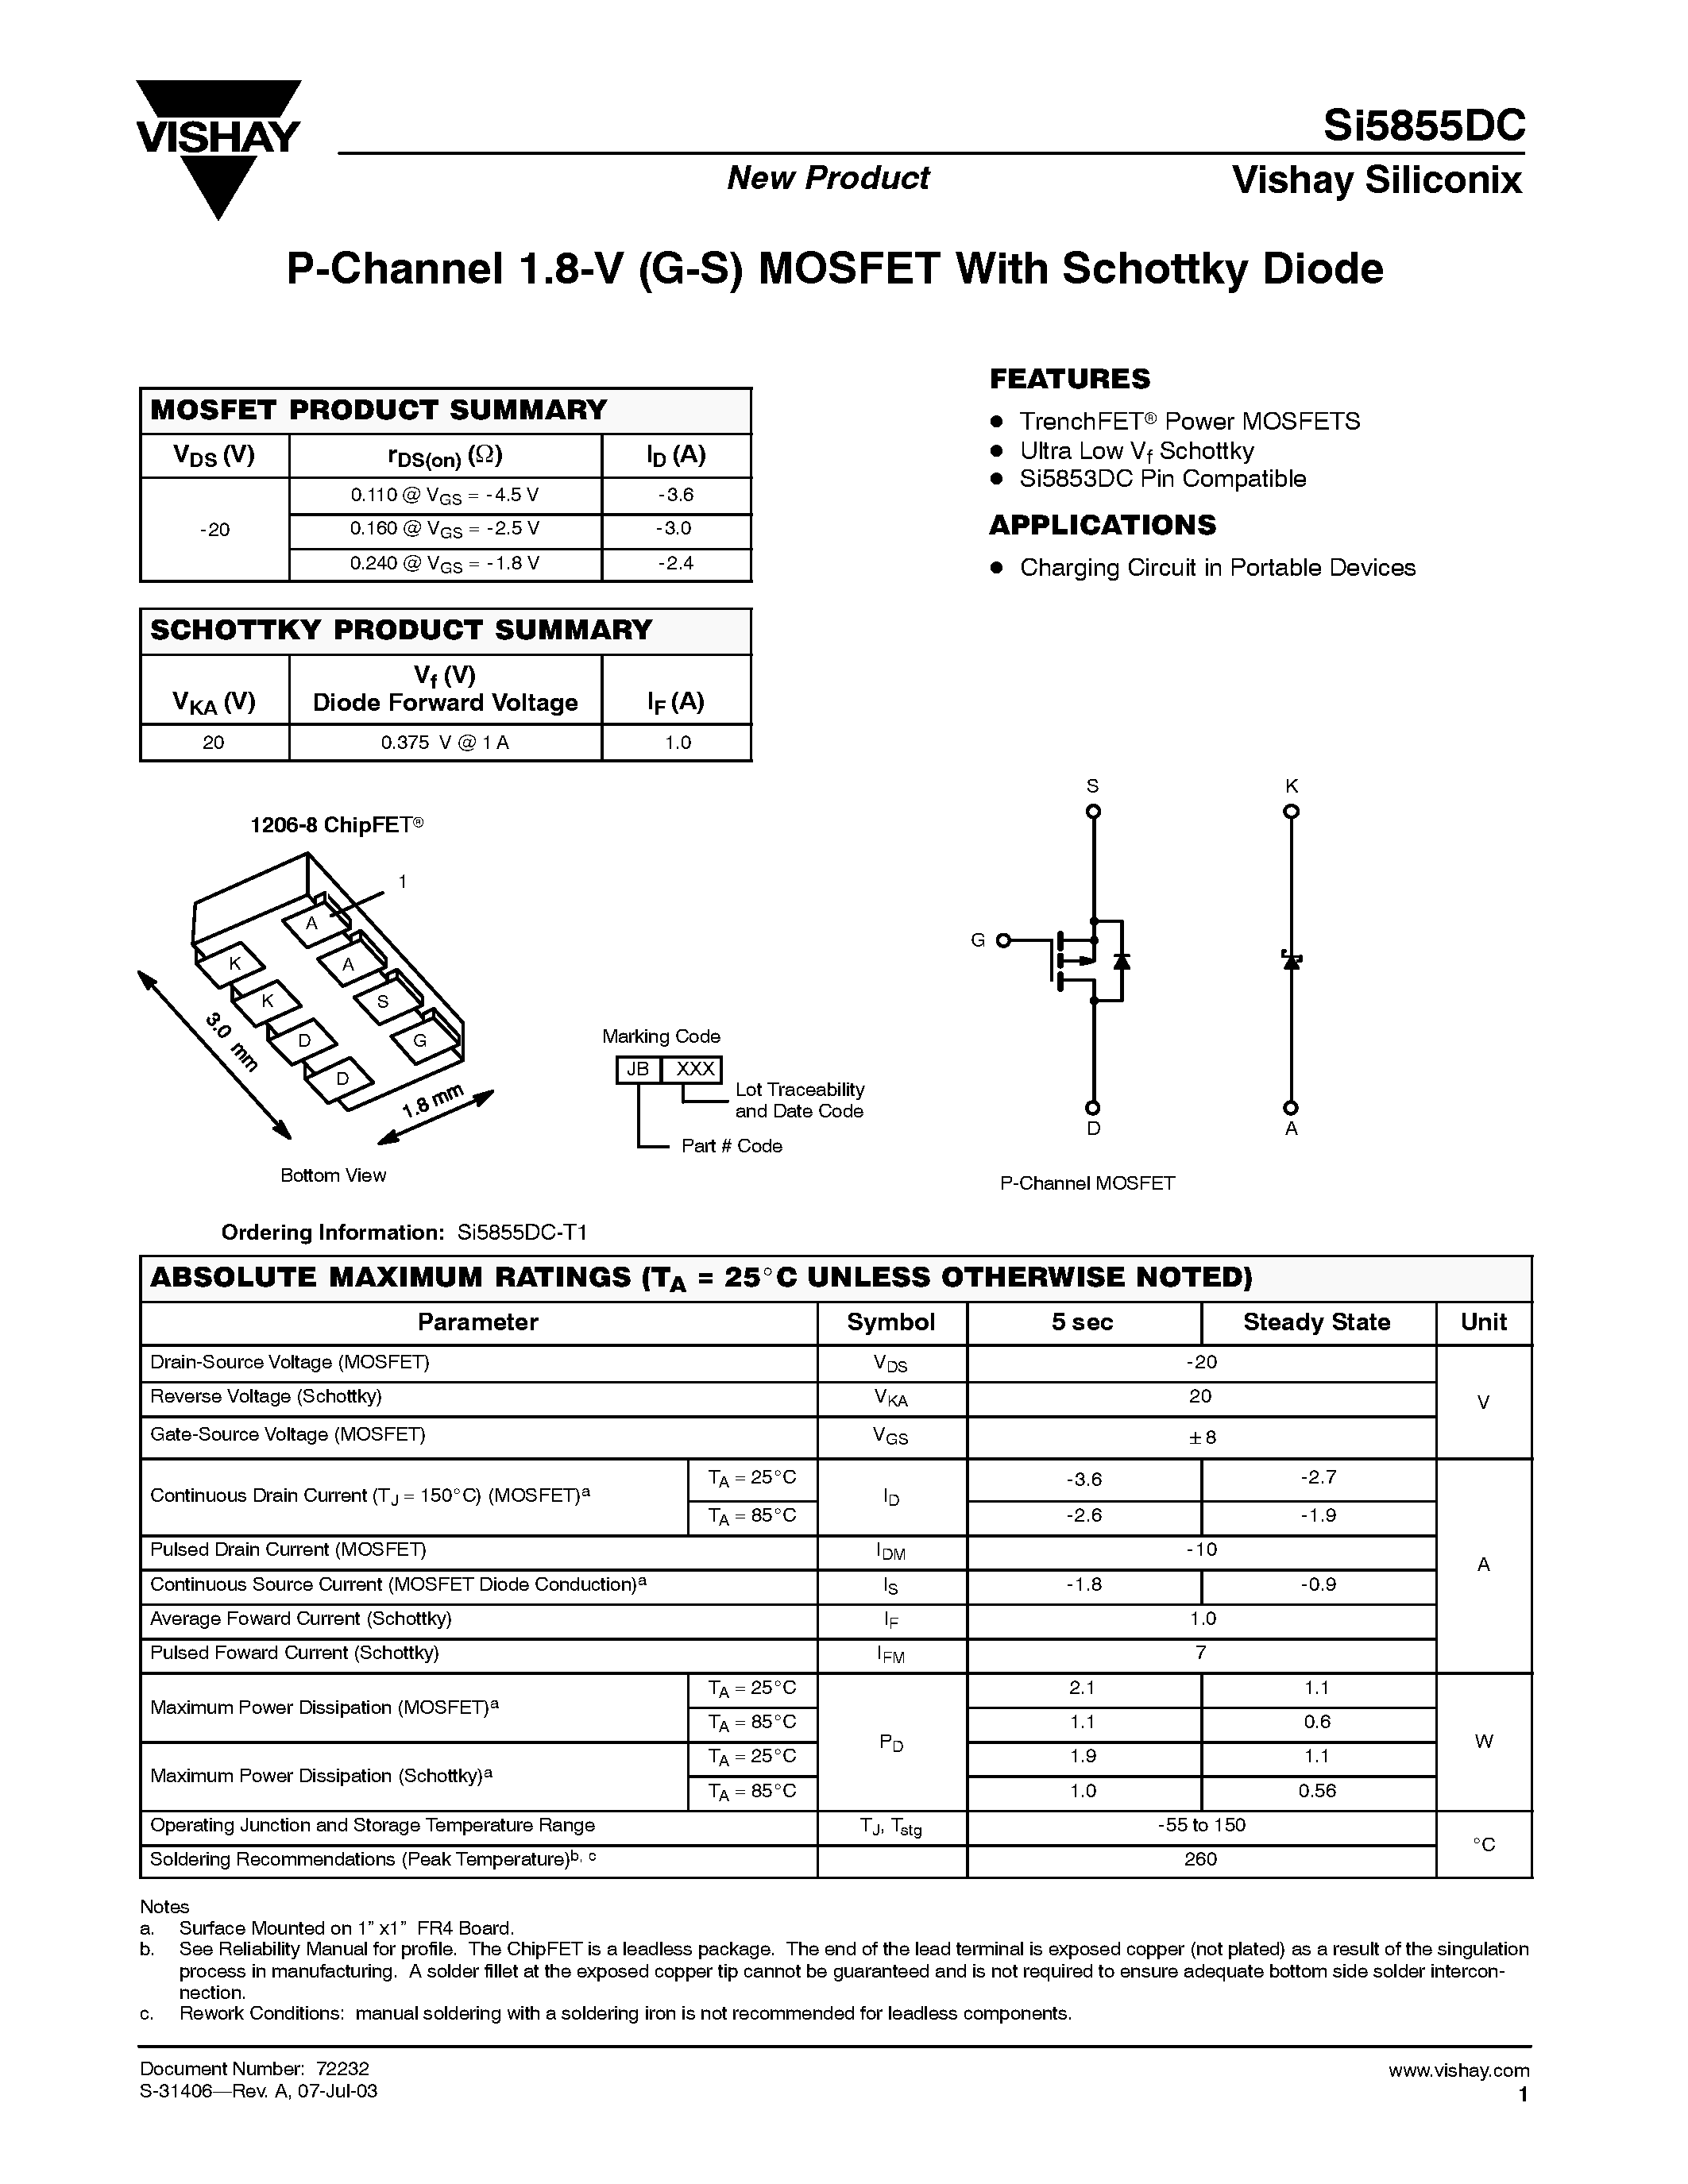 Datasheet SI5855DC - P-Channel 1.8-V (G-S) MOSFET With Schottky Diode page 1